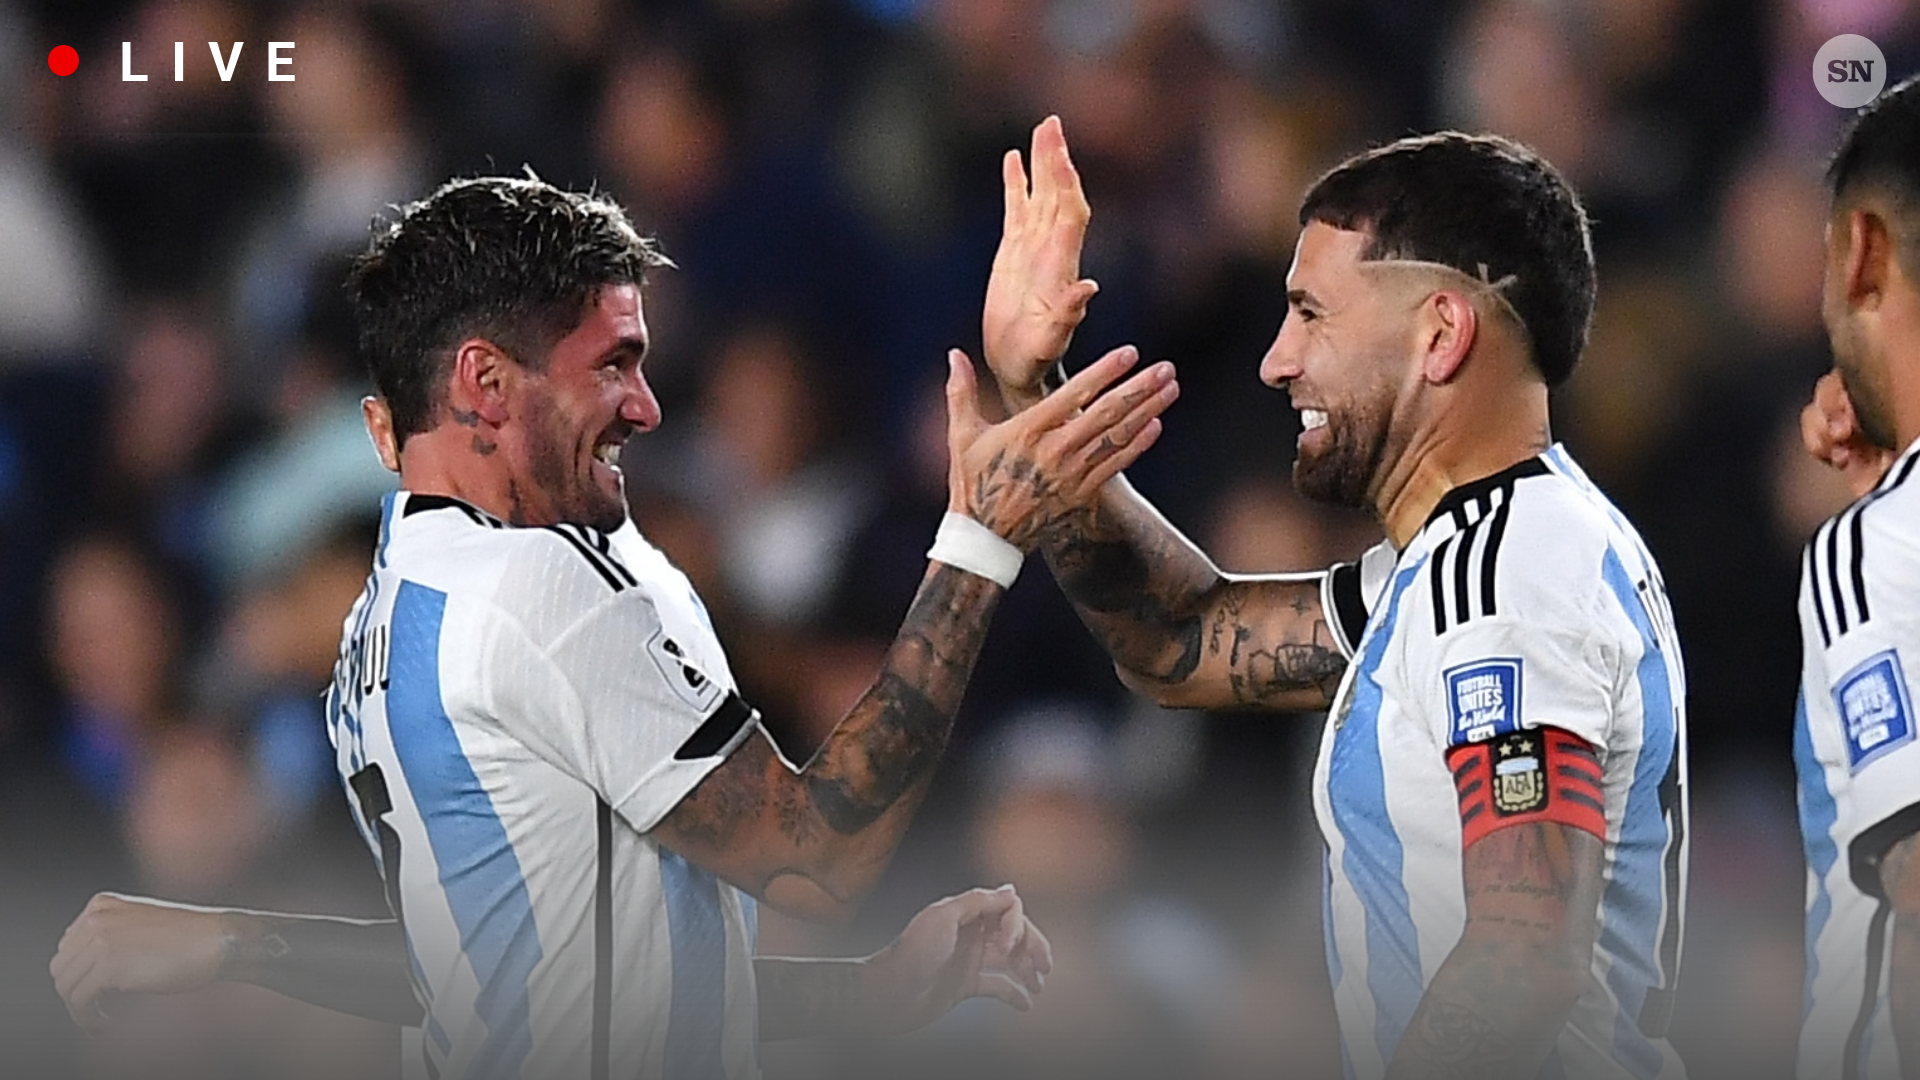 Argentina secured a 1-0 victory against Paraguay, thanks to Nicolas Otamendi's goal. Lionel Messi, although delivering an excellent performance, had two close encounters with the post but narrowly missed adding more goals for his team